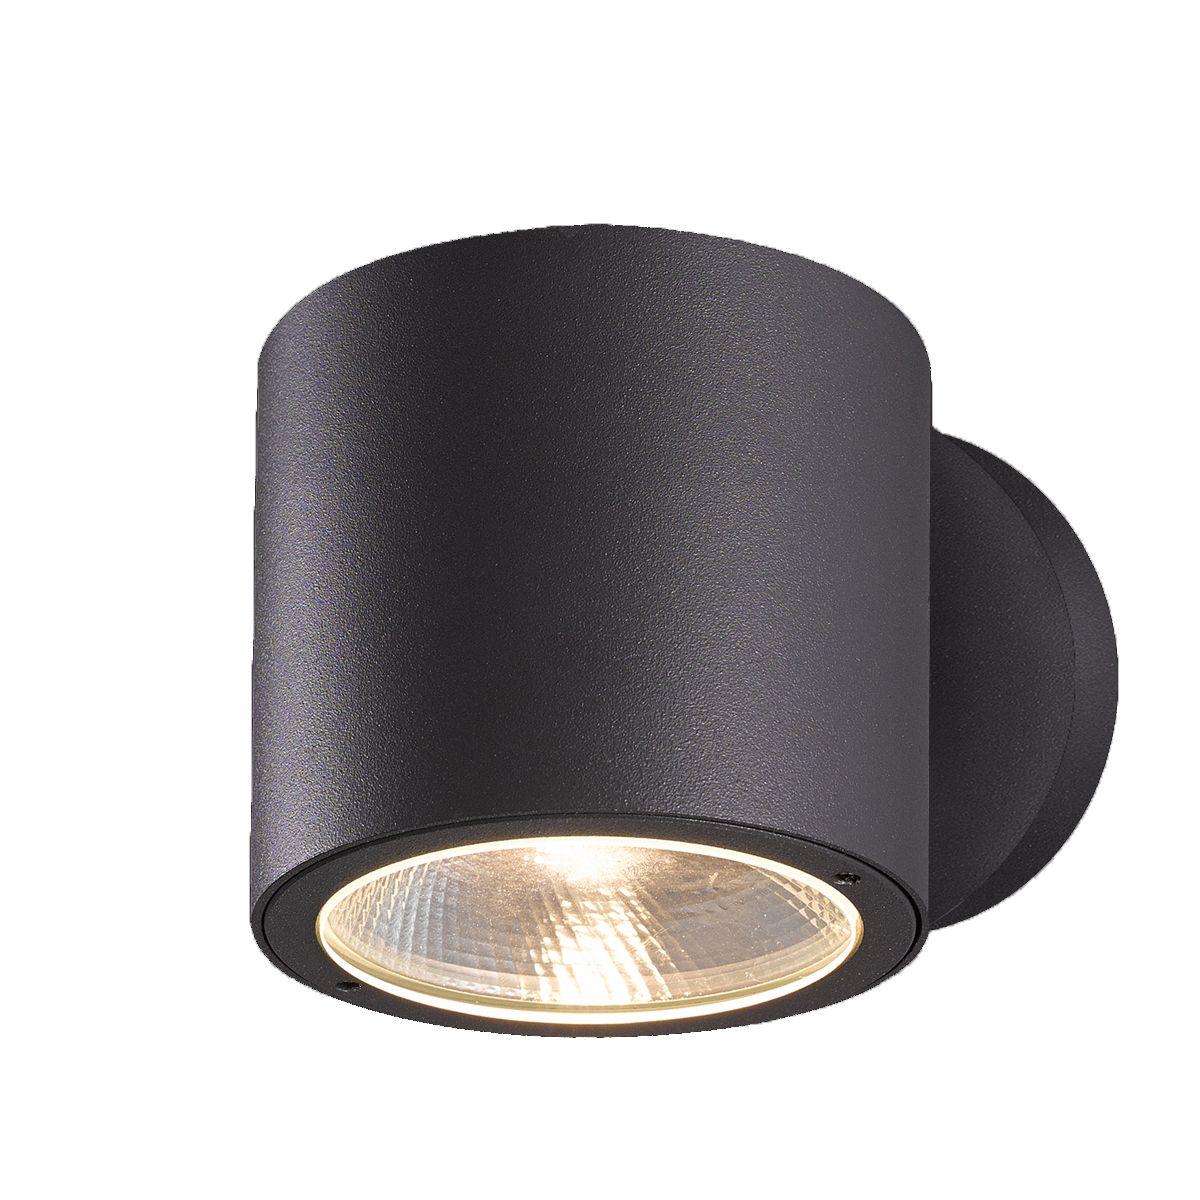 Volume 4 In 1 Light LED Outdoor Cylinder Wall Light 3000K Gray Finish